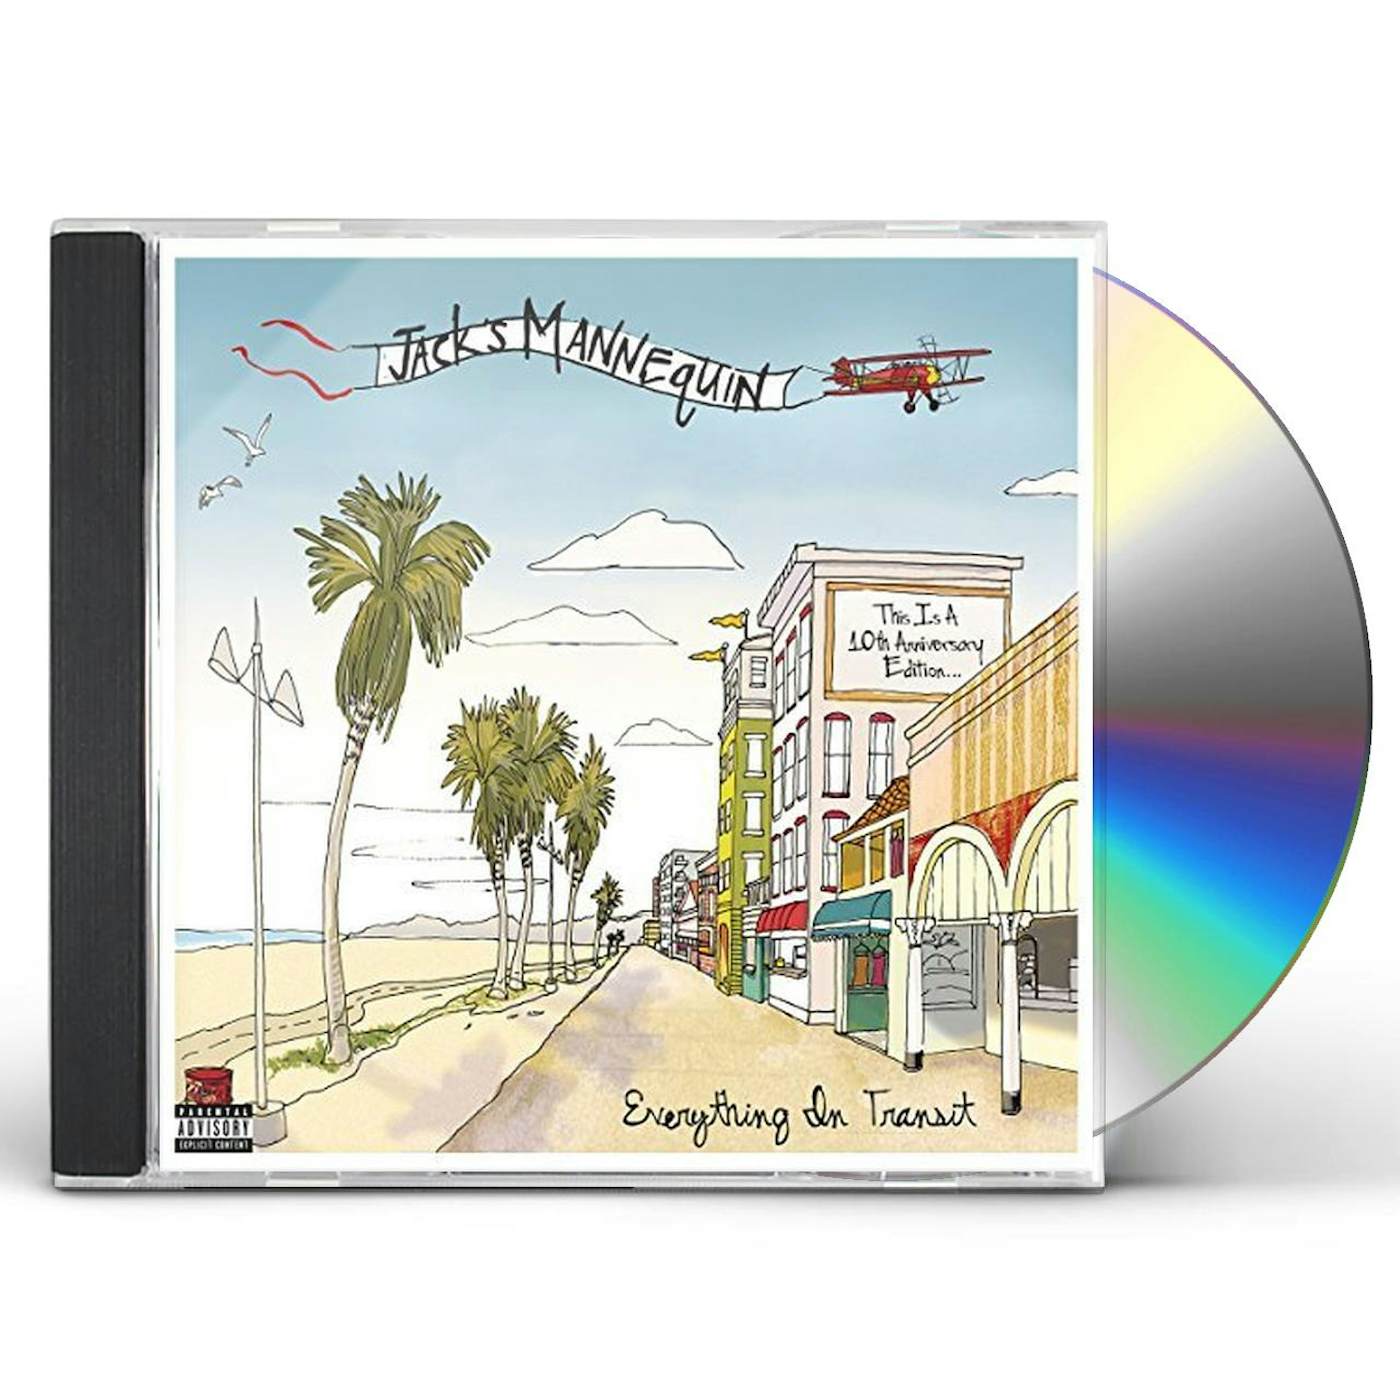 Jack's Mannequin EVERYTHING IN TRANSIT (10TH ANNIVERSARY EDITION) CD